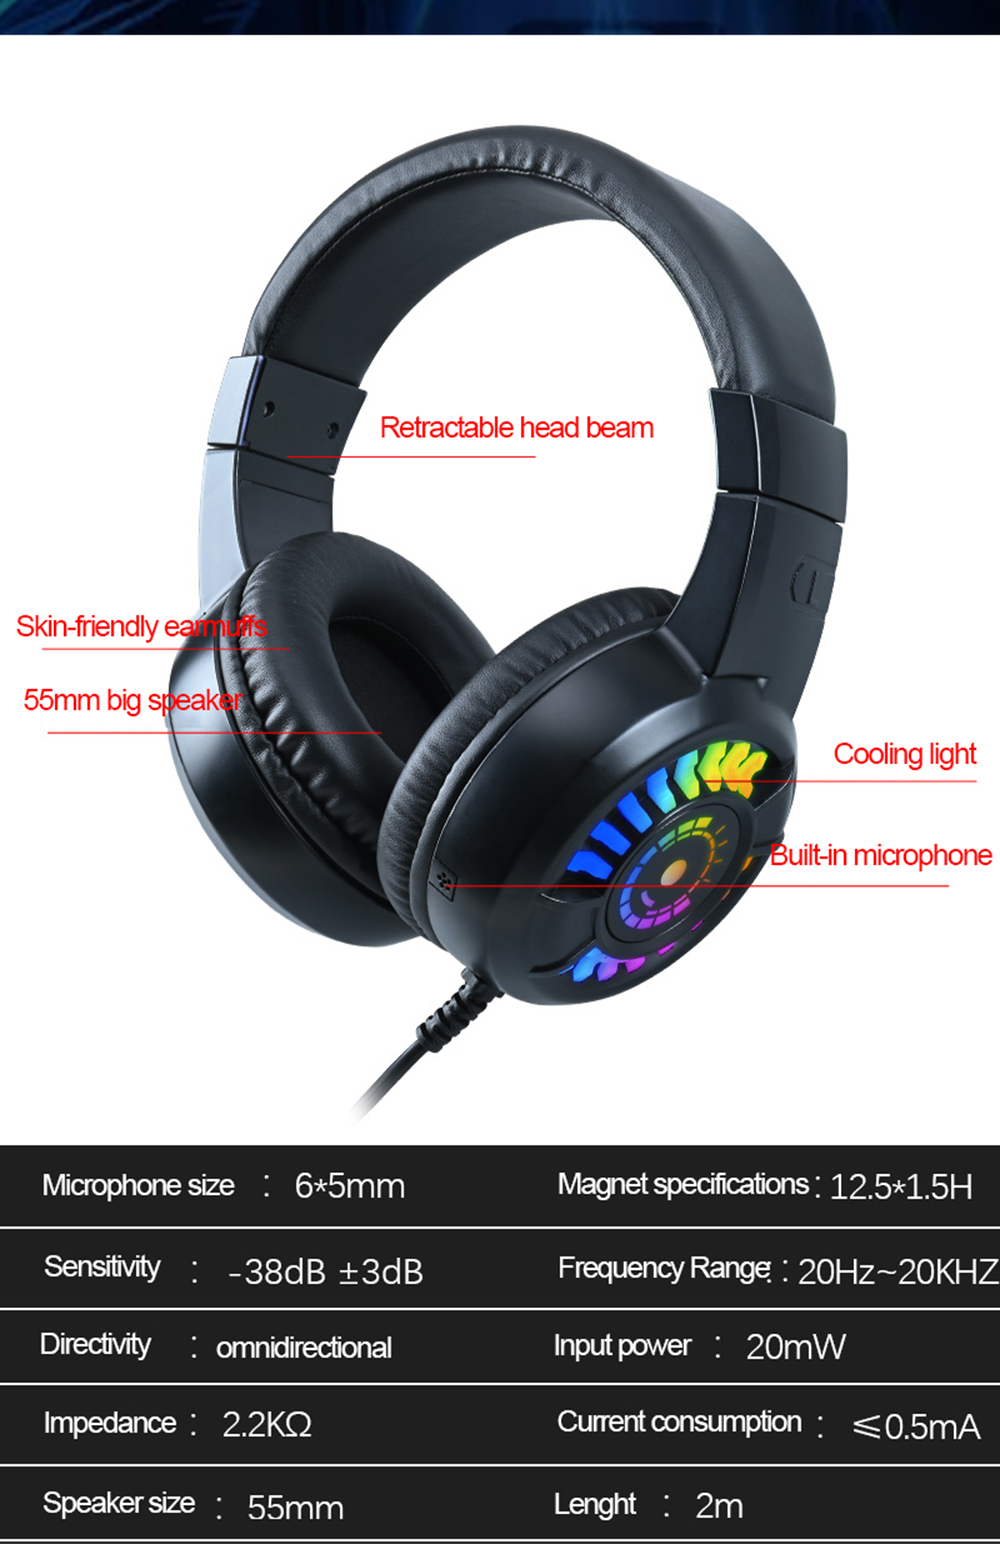 198I-A7-E-sport-Gaming-Headset-50mm-Unit-55mm-Speaker-Size-Cool-Lighting-Built-in-Microphone-35mmUSB-1802467-8